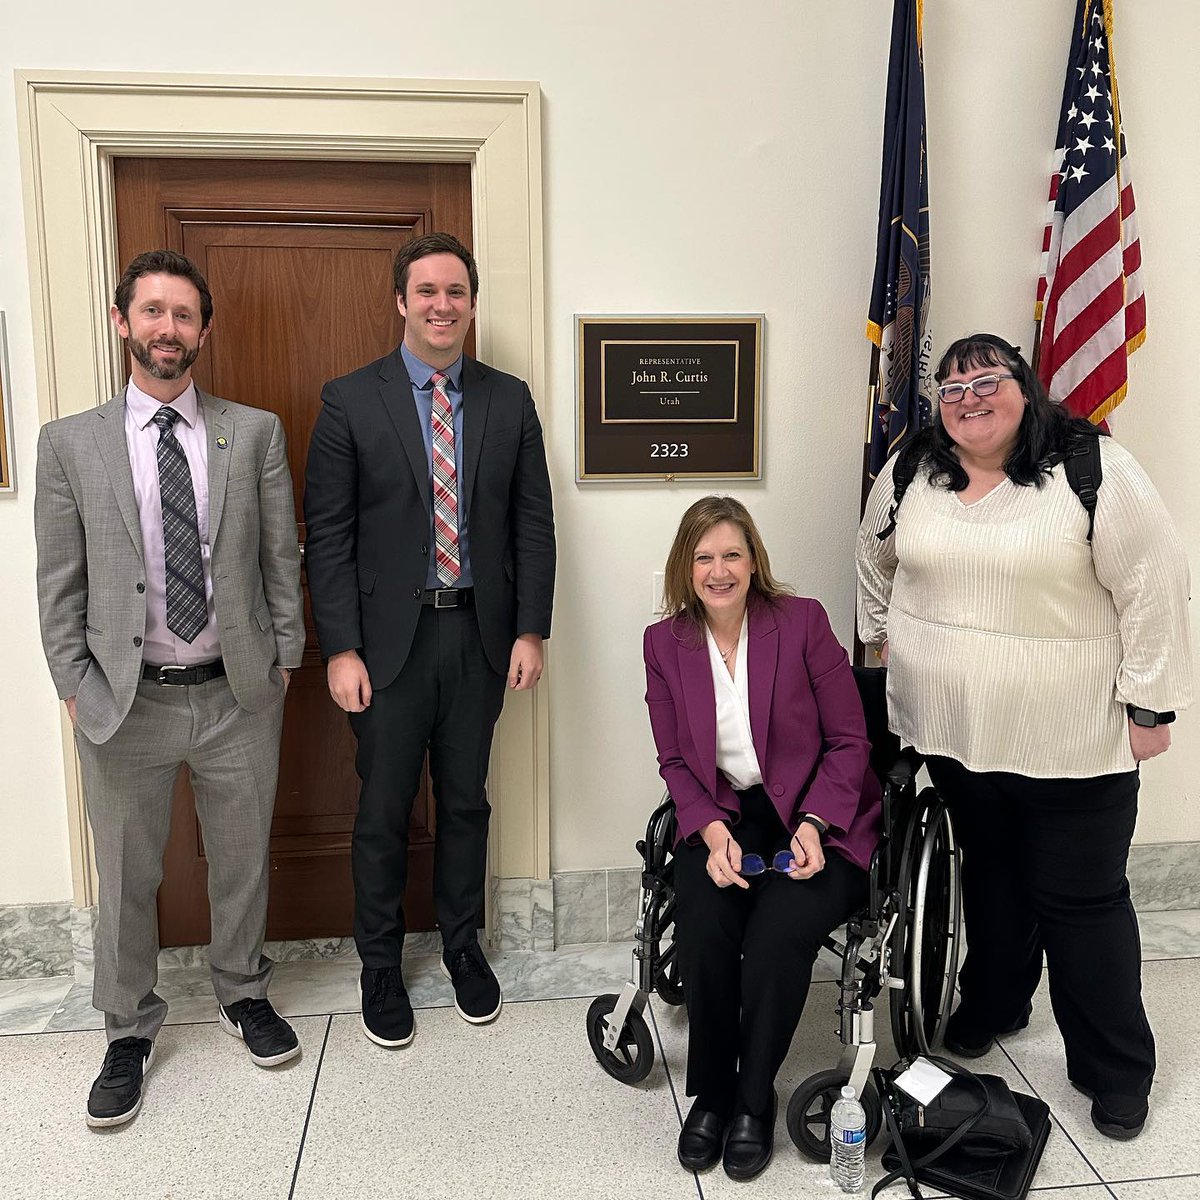 PC Project reps joined the Coalition of Skin Diseases and Mike Siegel from @PeDRAResearch to advocate for patients with debilitating skin diseases. #CSDontheHill #SafeStepAct